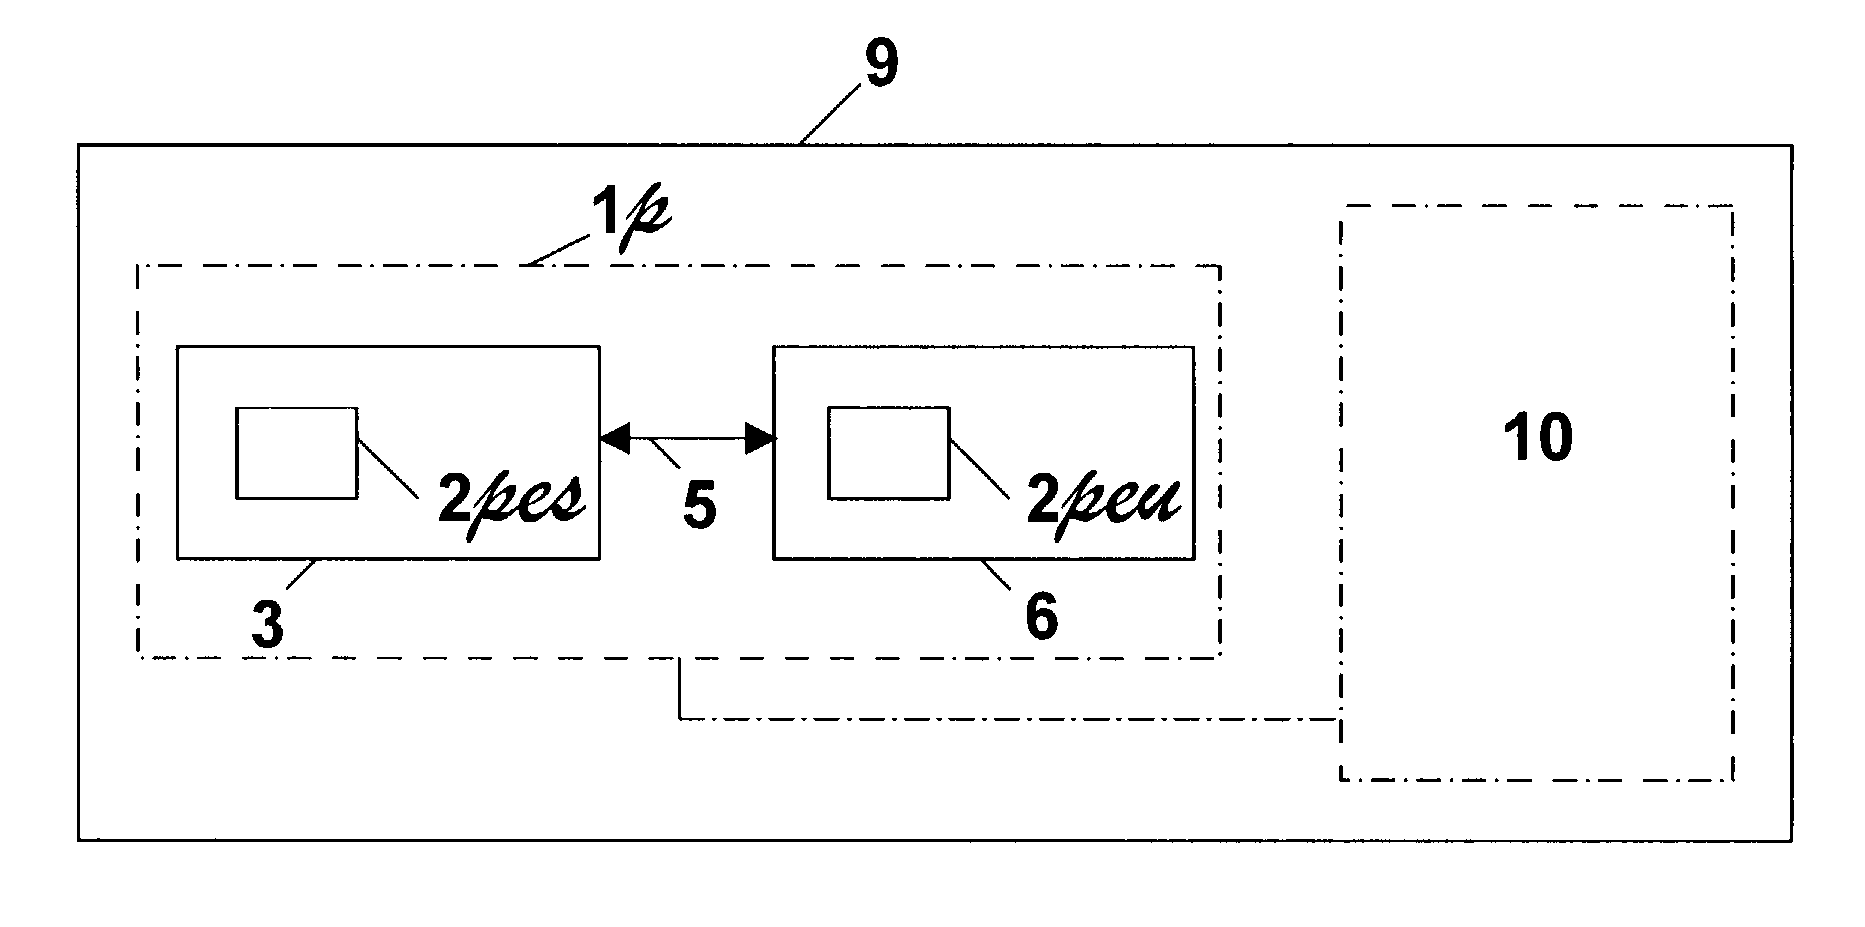 Method to protect software against unwanted use with a "detection and coercion" principle